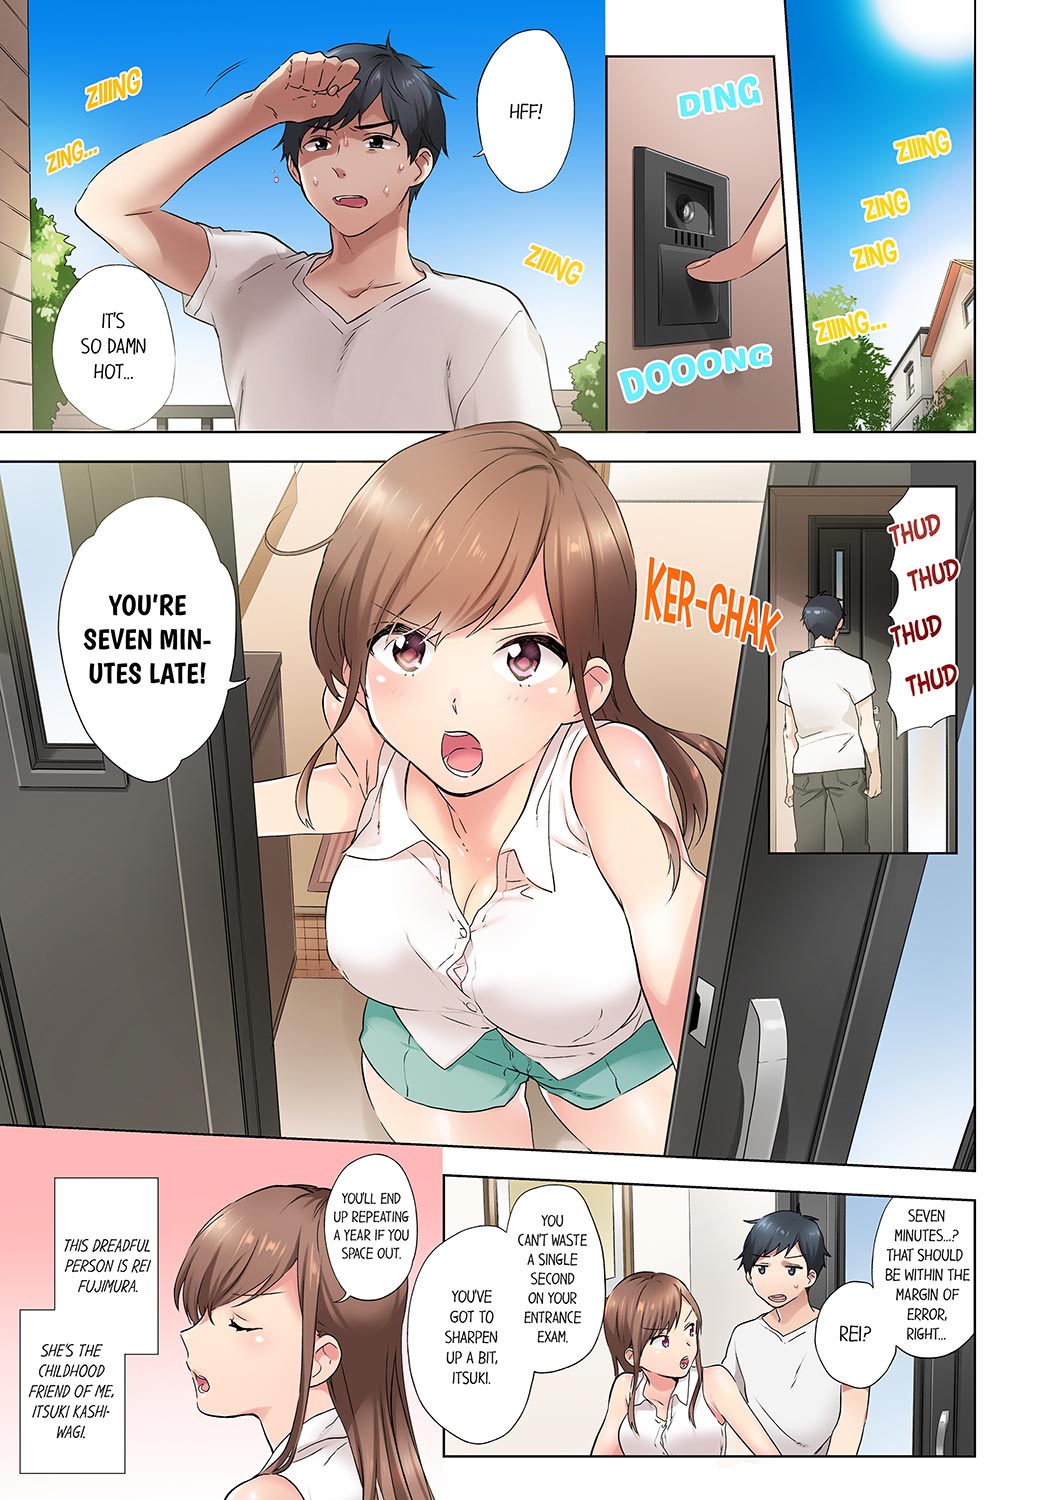 A Scorching Hot Day with A Broken Air Conditioner. If I Keep Having Sex with My Sweaty Childhood Friend… - Chapter 1 Page 1